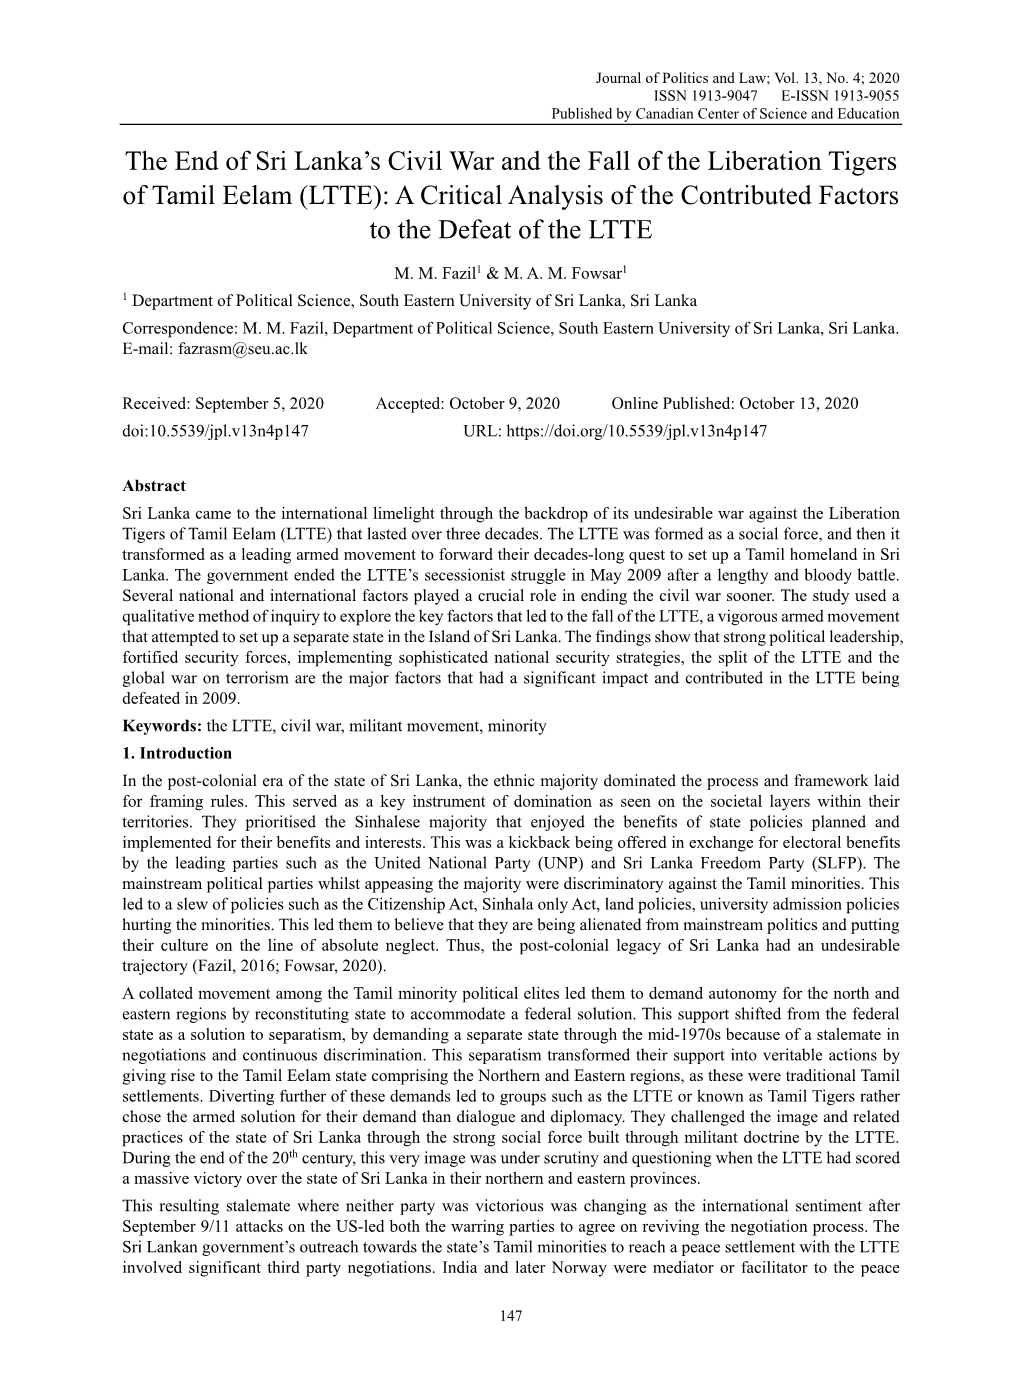 LTTE): a Critical Analysis of the Contributed Factors to the Defeat of the LTTE